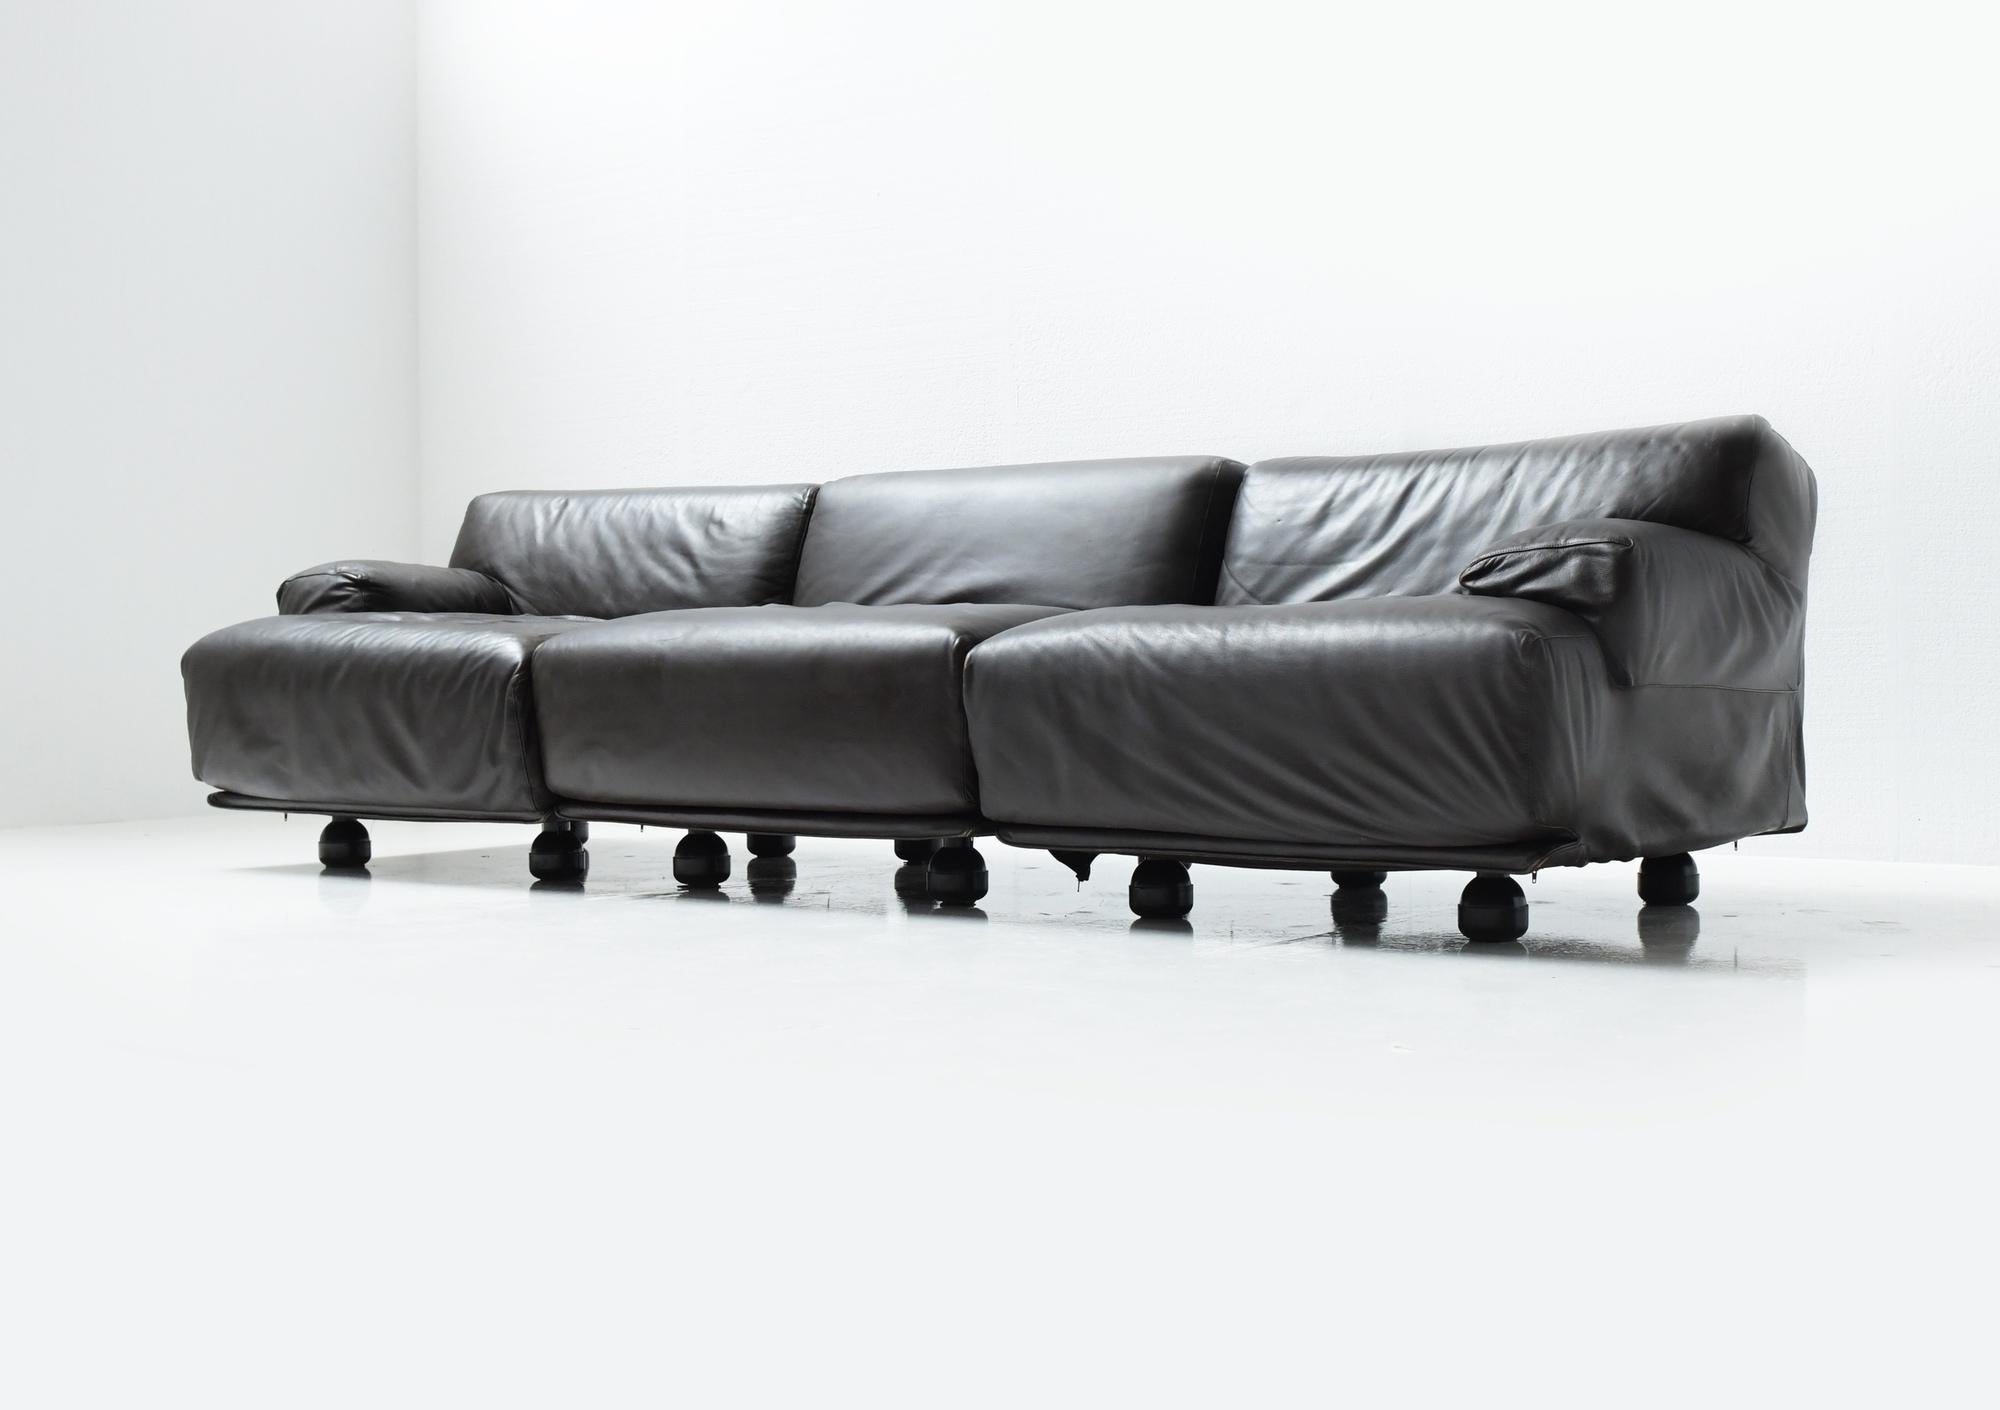 Great modular Fiandra sofa in dark brown leather.
Designed by Vico Magistretti for Cassina.

Very good vintage condition with normal signs of use. With label.